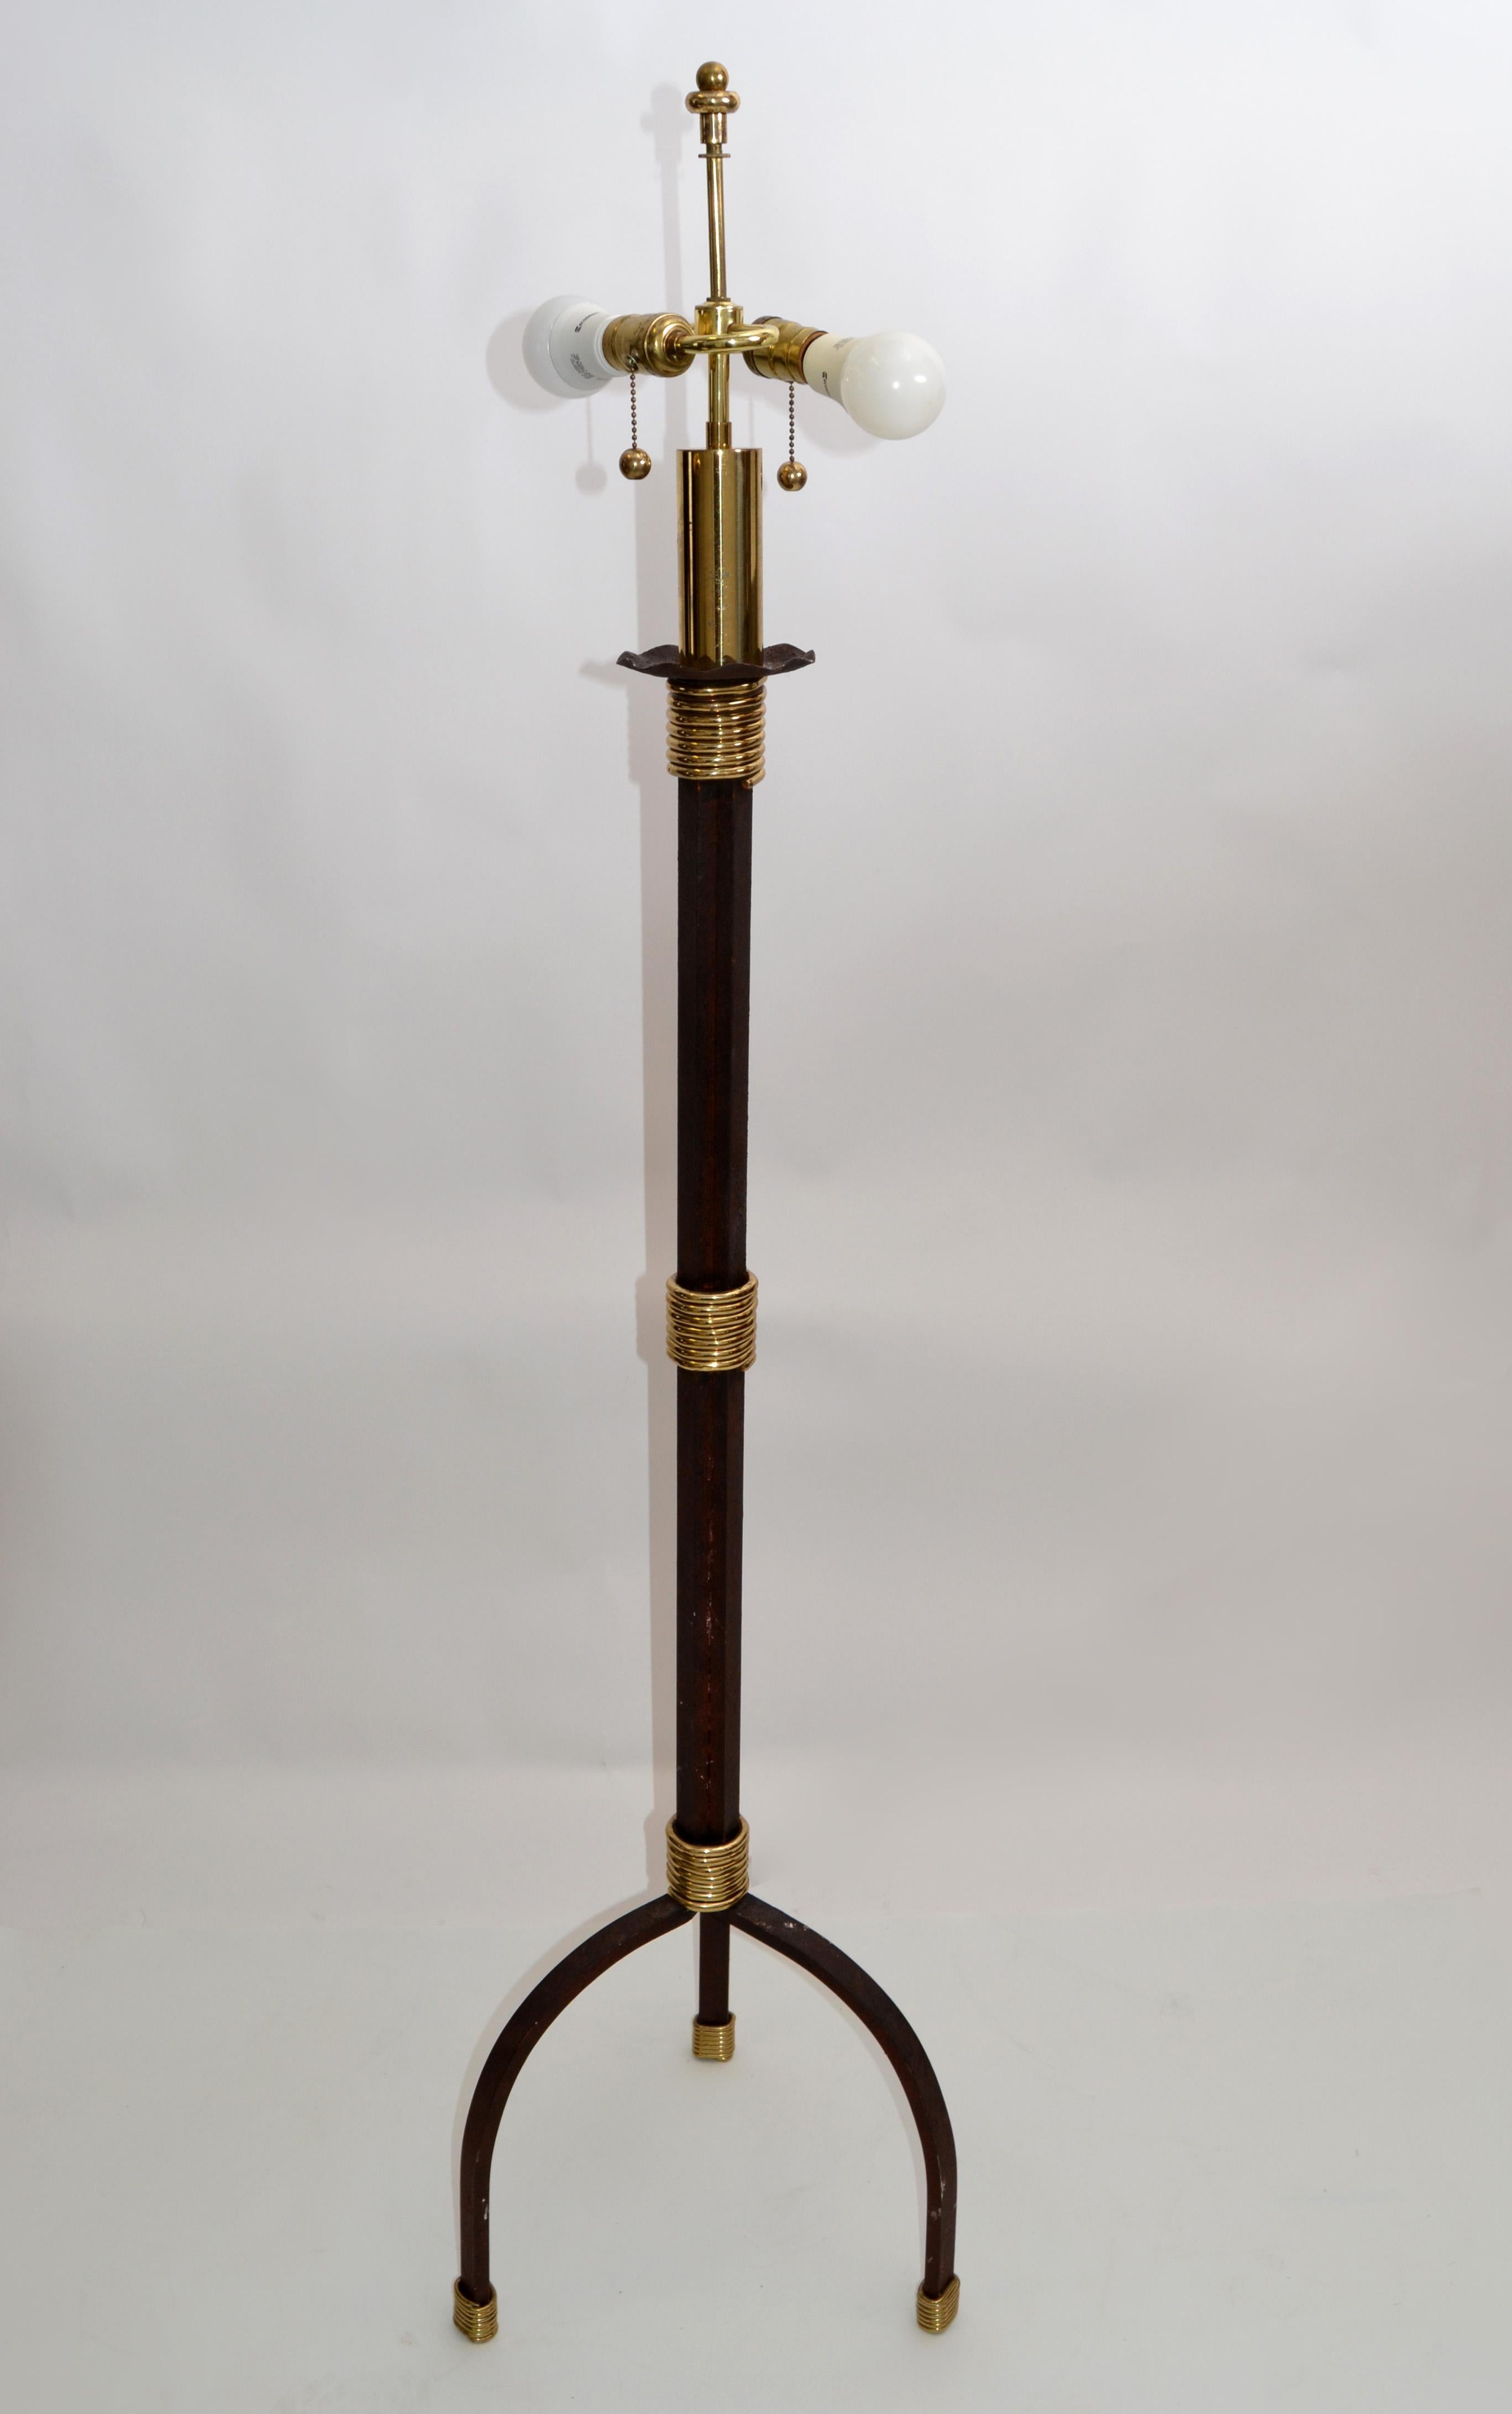 Tall Mid-Century Modern handcrafted floor lamp in burgundy brown iron and brass detail on a tripod base from the 1970s.
Has a 2 socket light with pull strings. 
Takes two regular or LED light bulbs with max. 75 watts.
Shade not included.
 